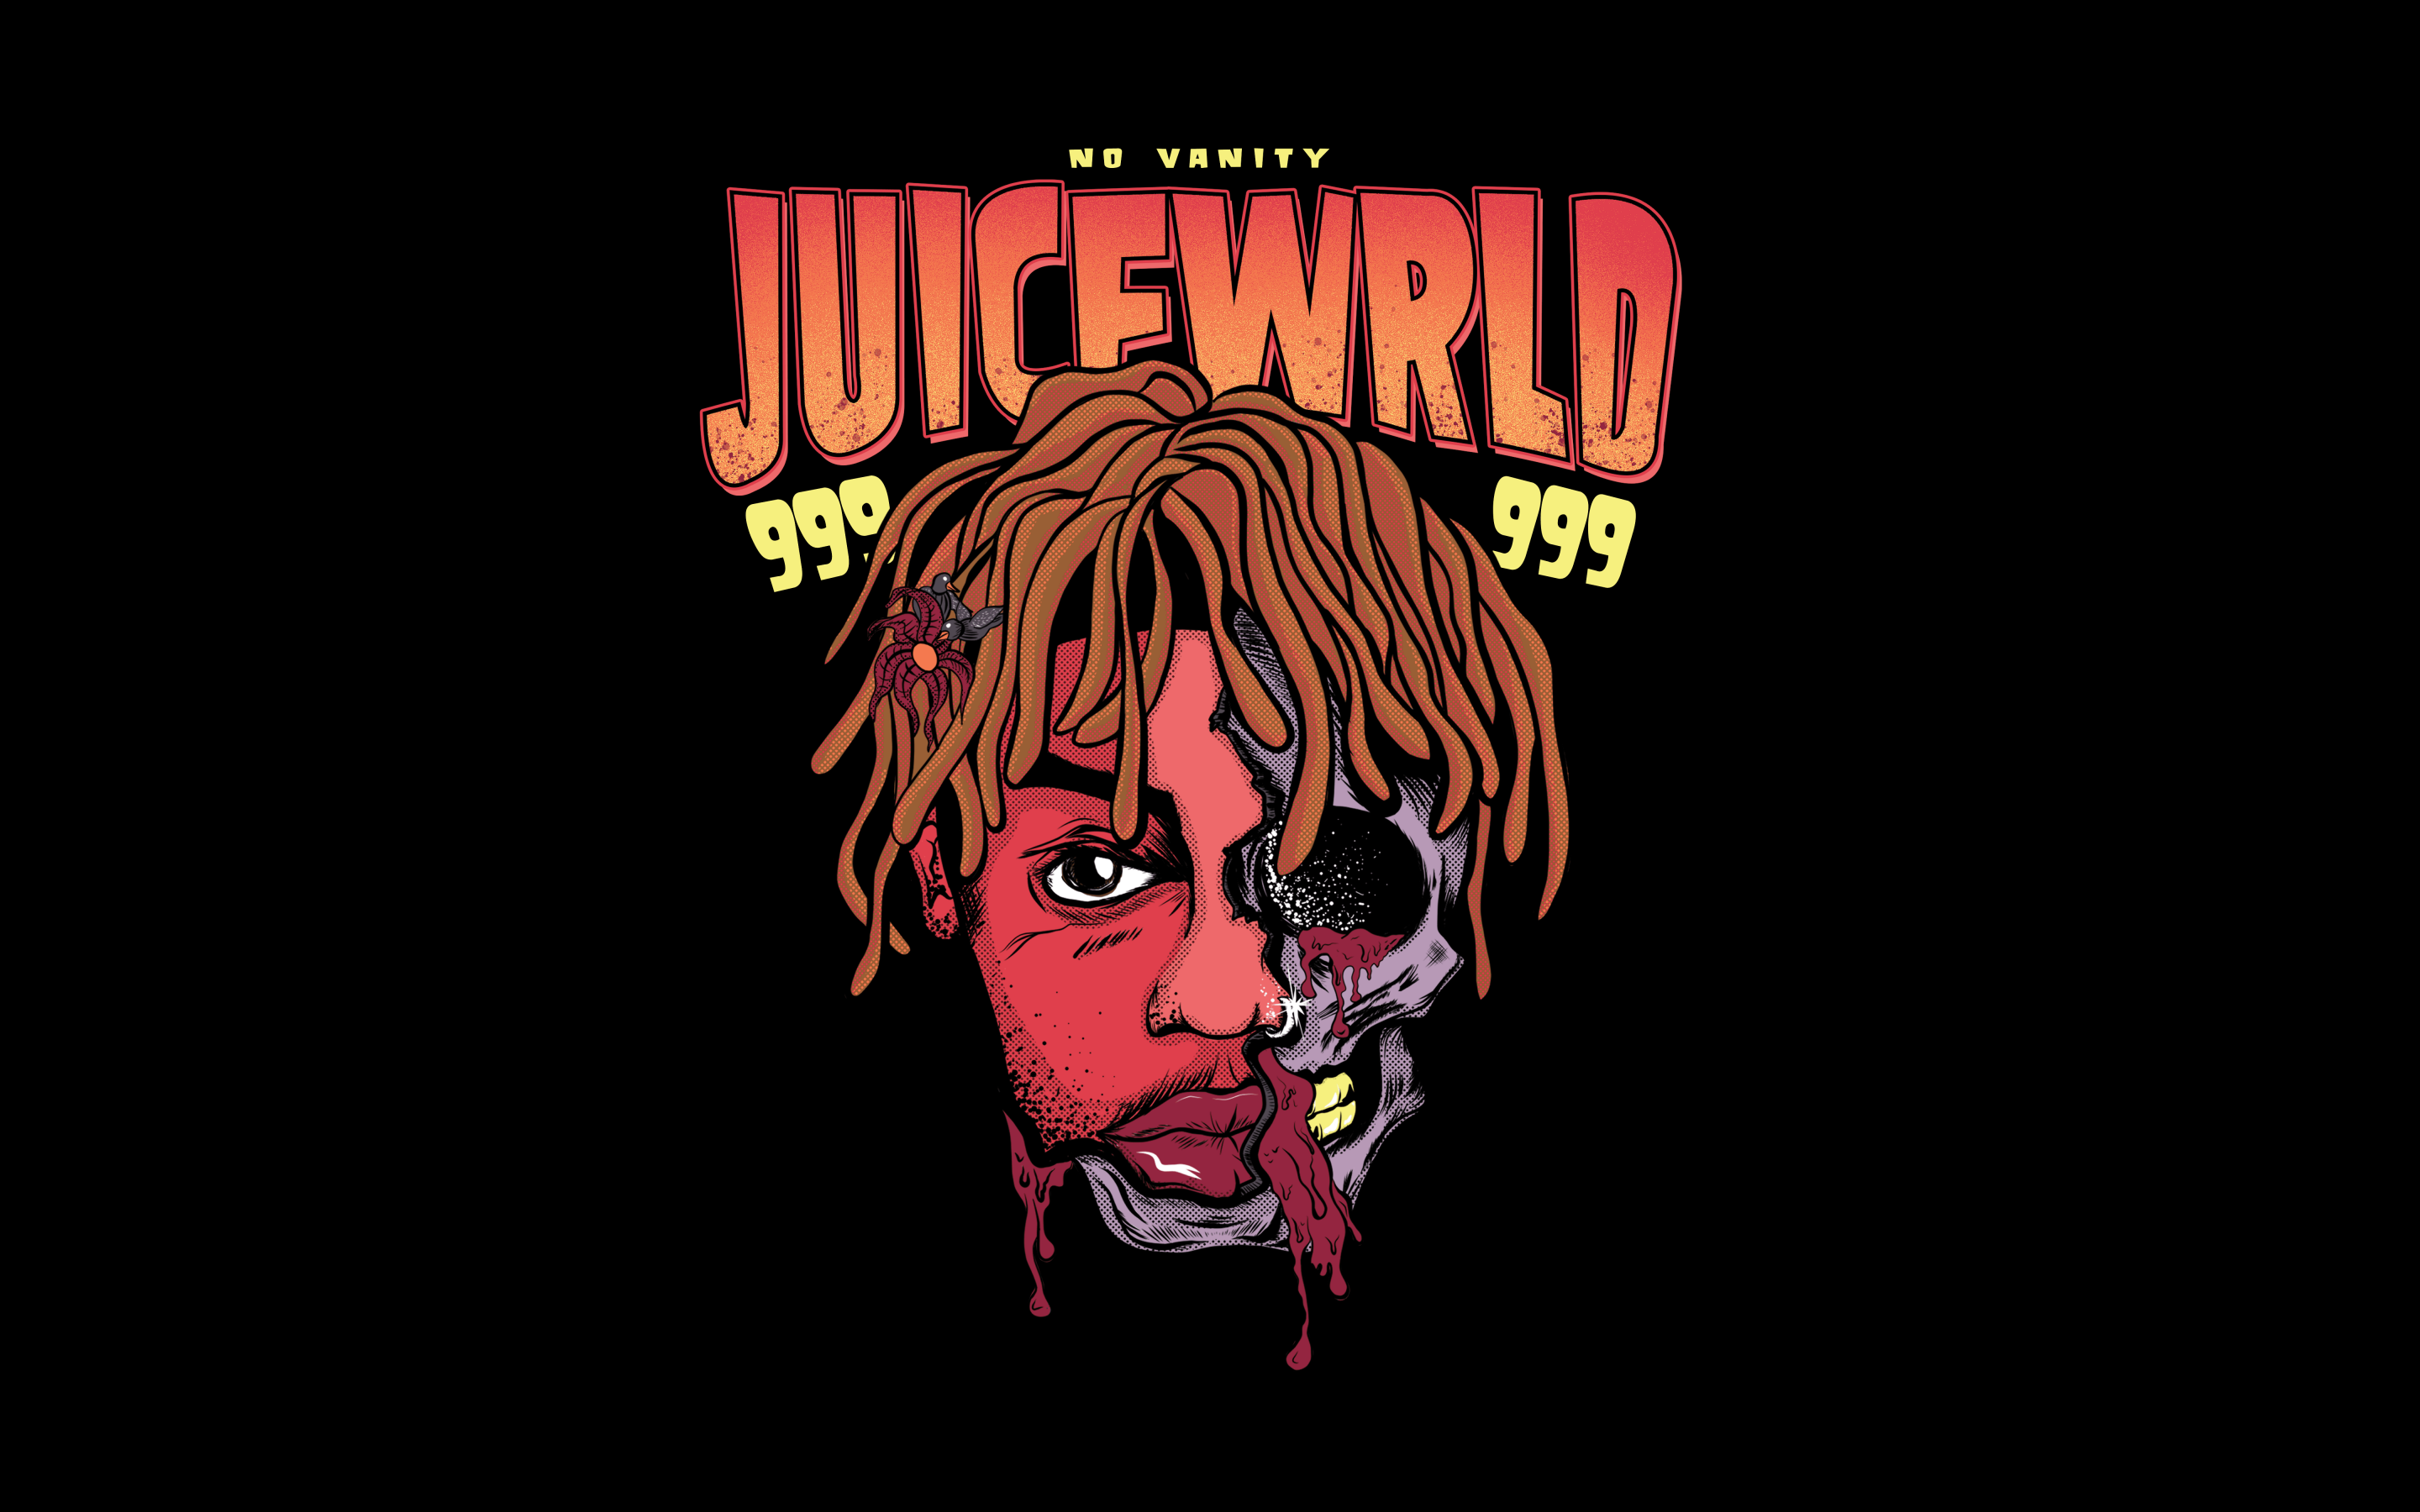 999 phone wallpaper that I made today in Photoshop  took about 3 hours to  make feel free to screenshot and use  rJuiceWRLD